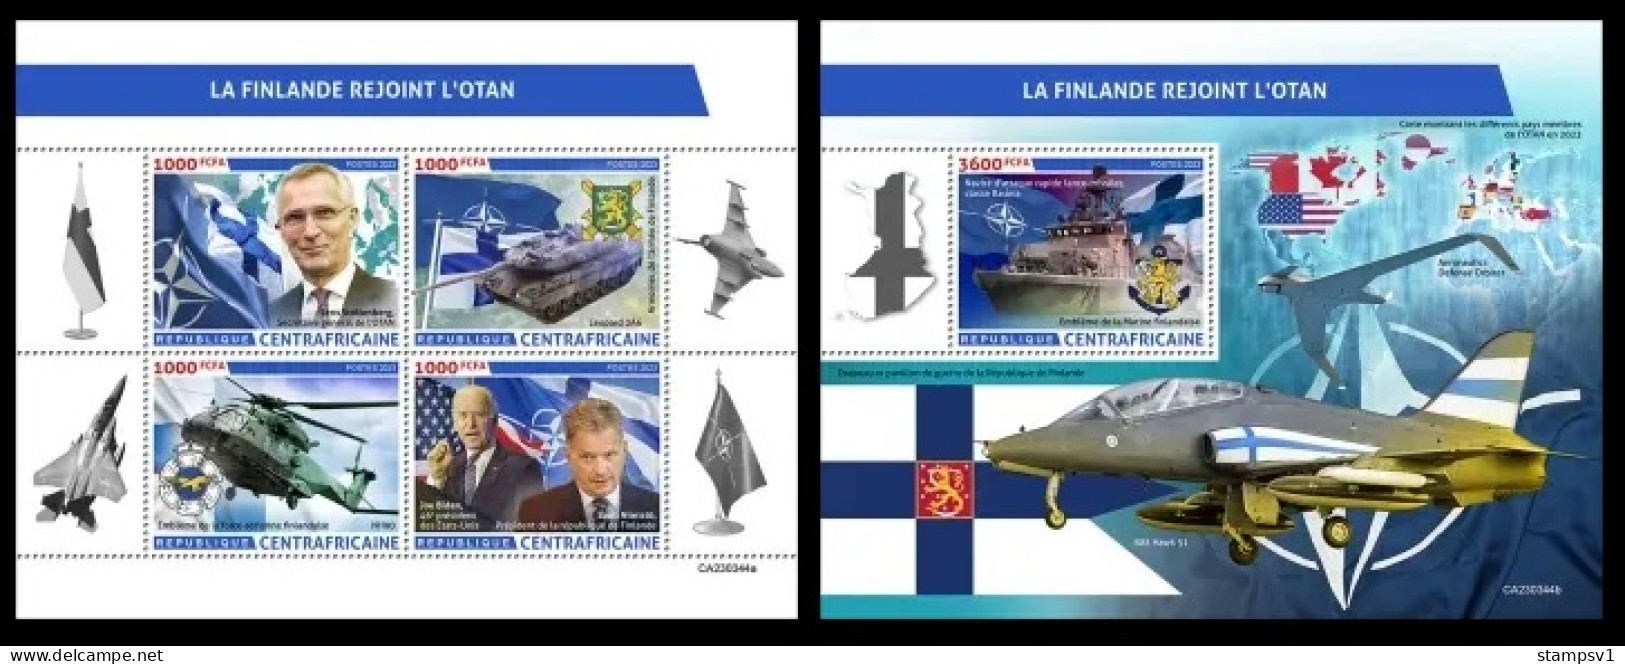 Central Africa 2023 Finland Joins NATO. (344) OFFICIAL ISSUE - NATO